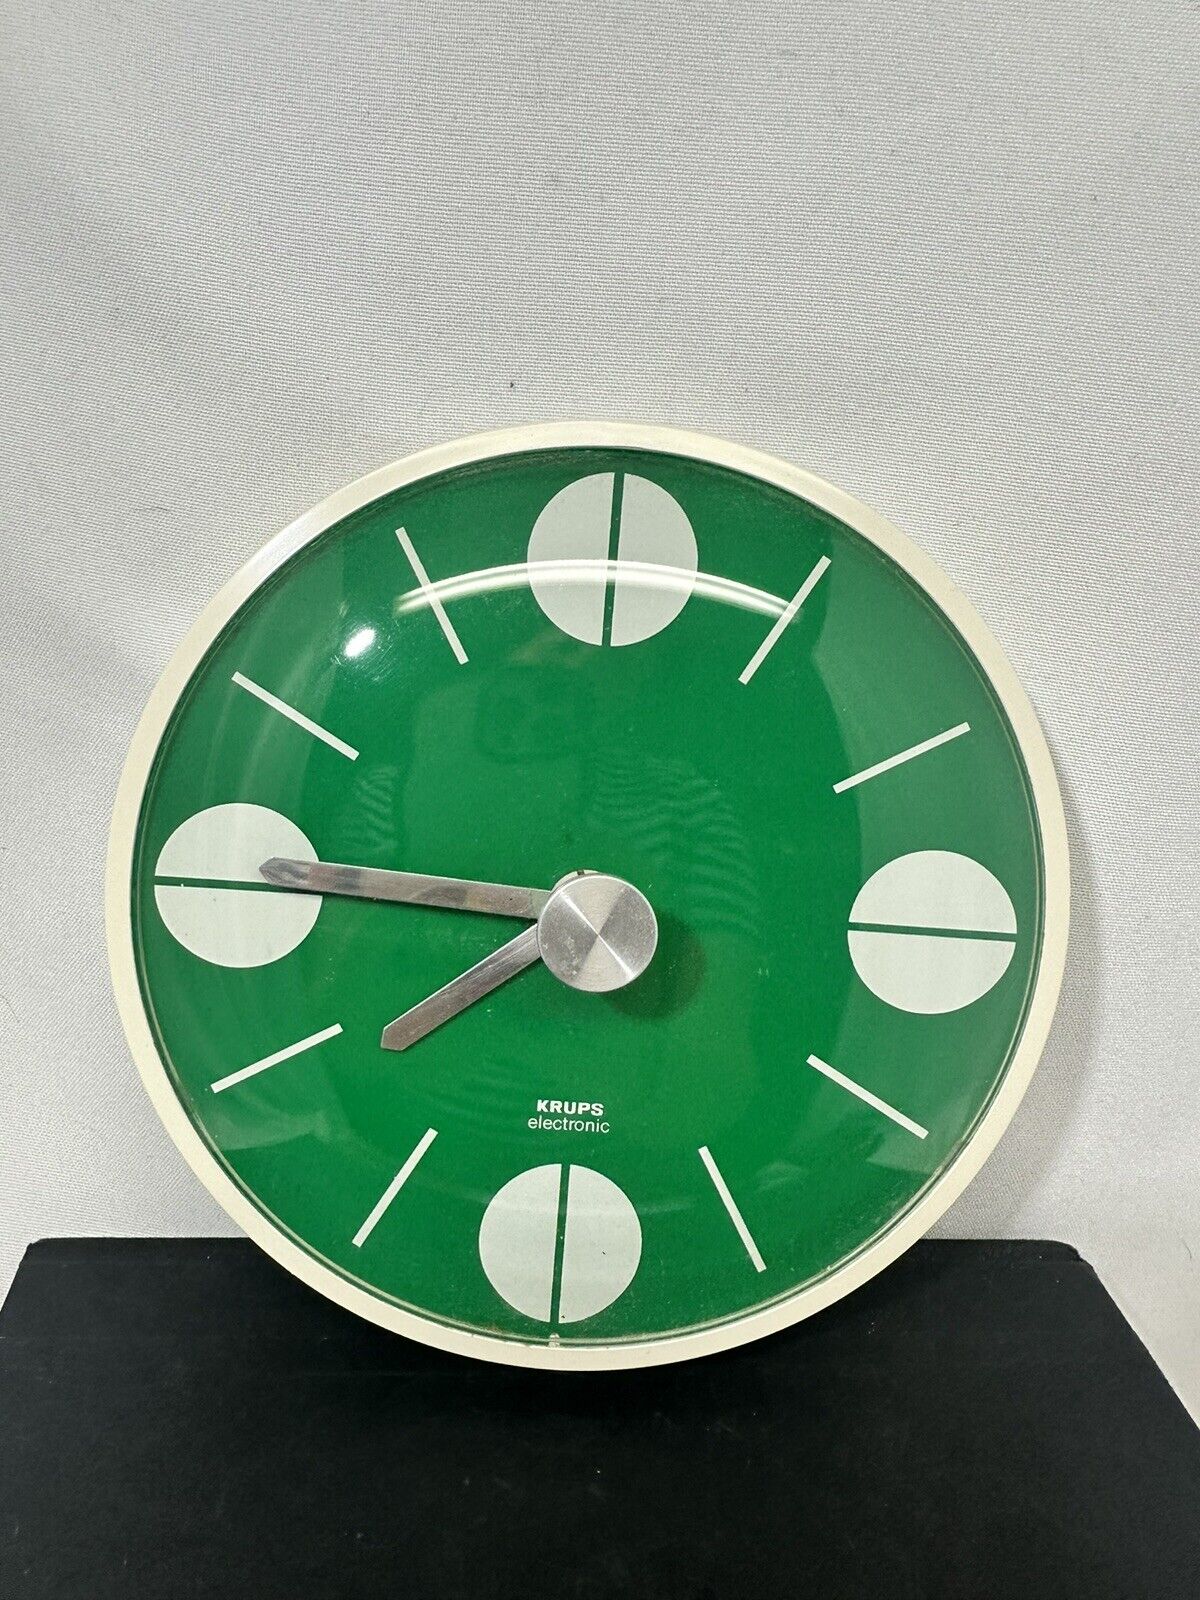 Vintage Pop Art Space Age Krups Wall Clock 1970s Collectible Green MCM Germany